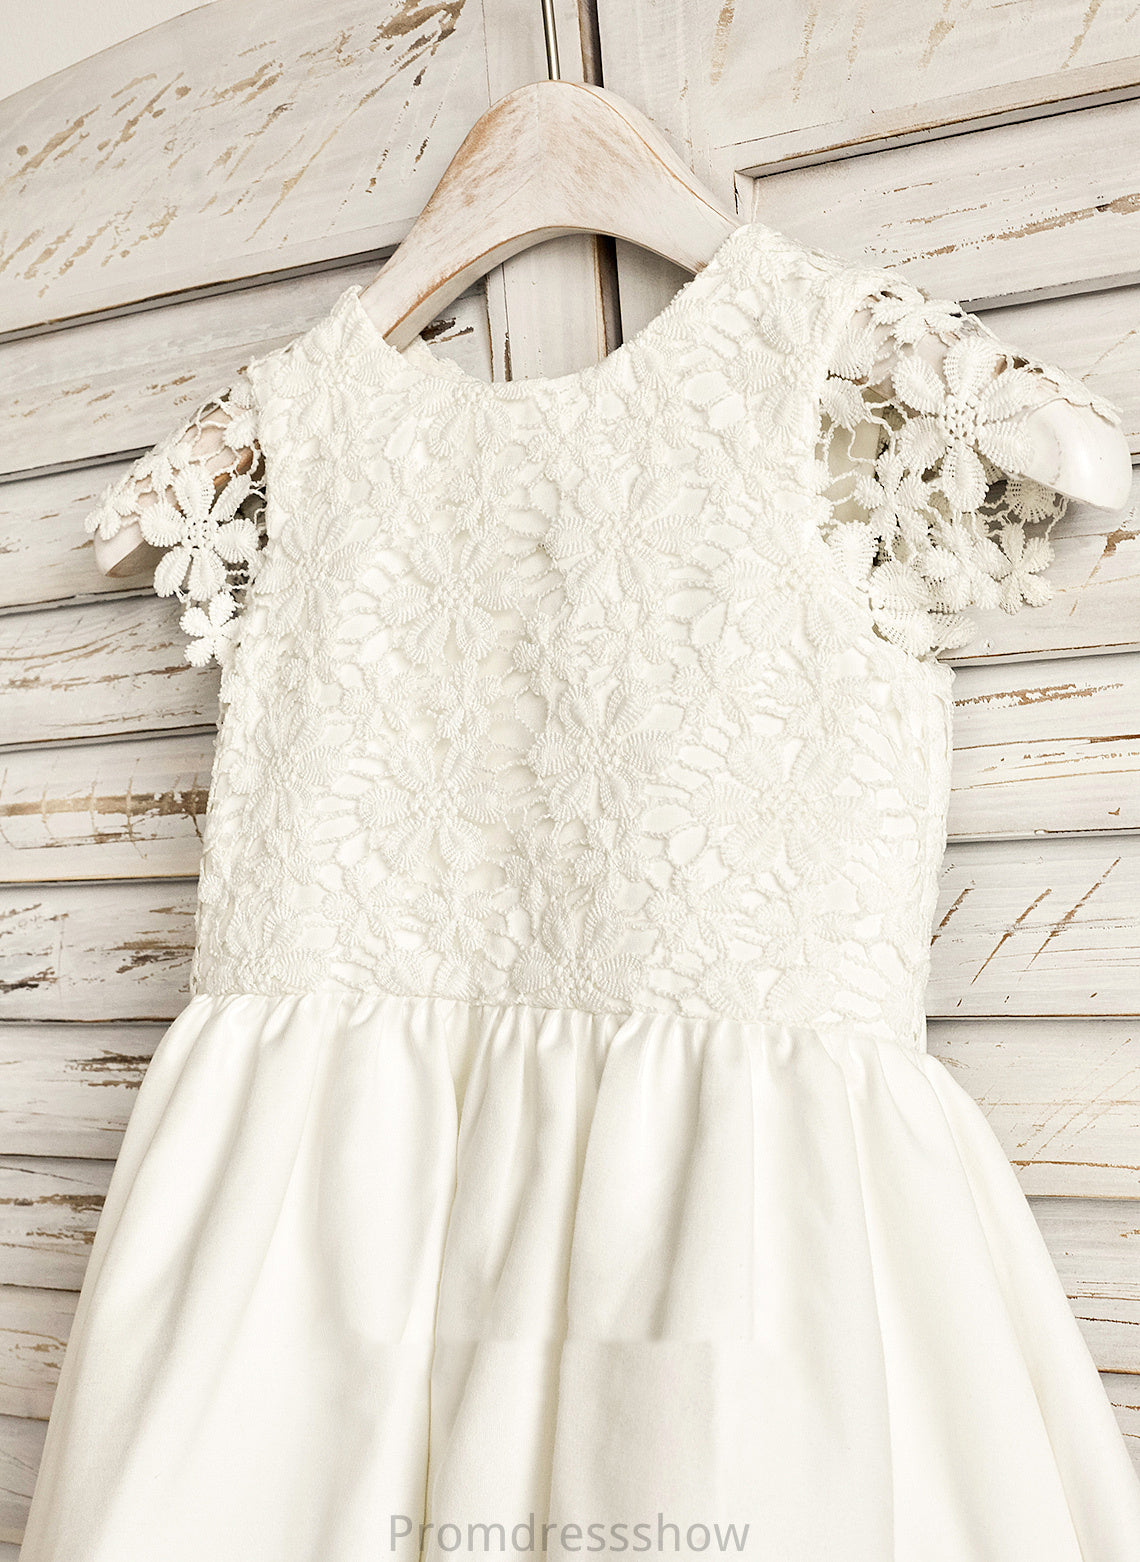 Dress Satin Flower Girl Dresses Sleeveless - A-Line With Girl Scoop Knee-length Lace/Bow(s) Neck Princess Flower